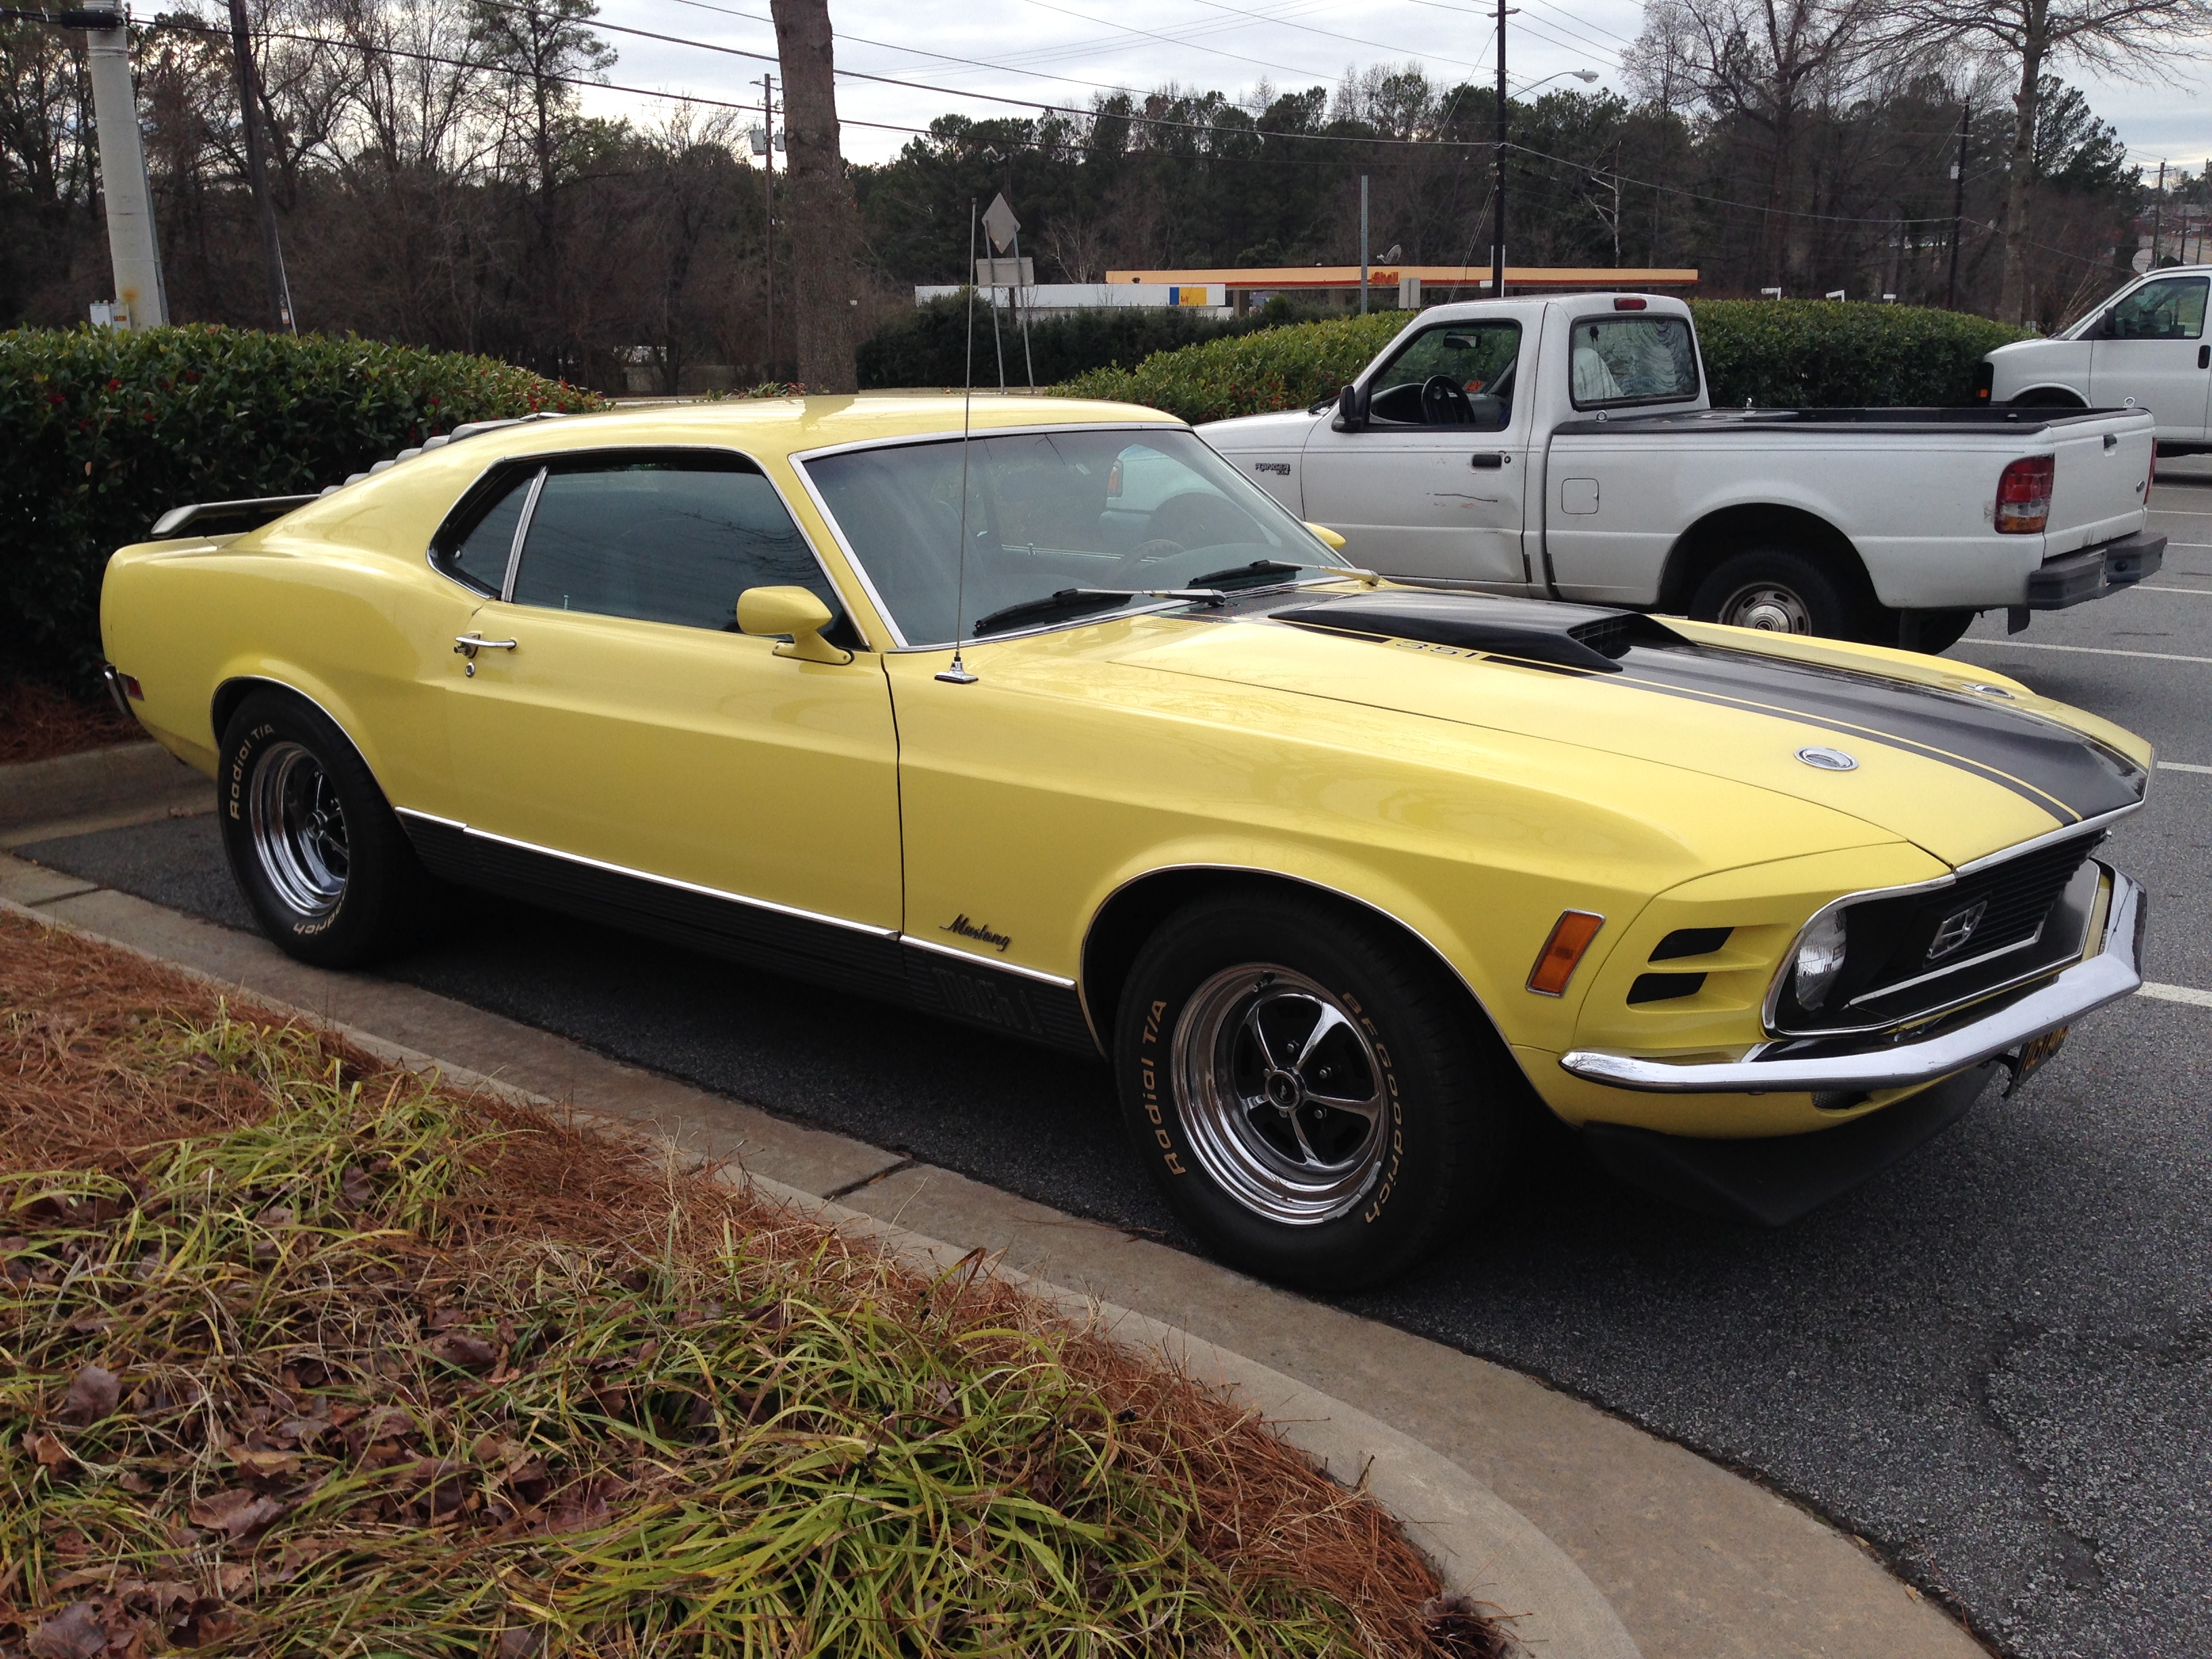 CC Capsule: 1970 Ford Mustang Mach 1 - If You Can't Take The Heat ...